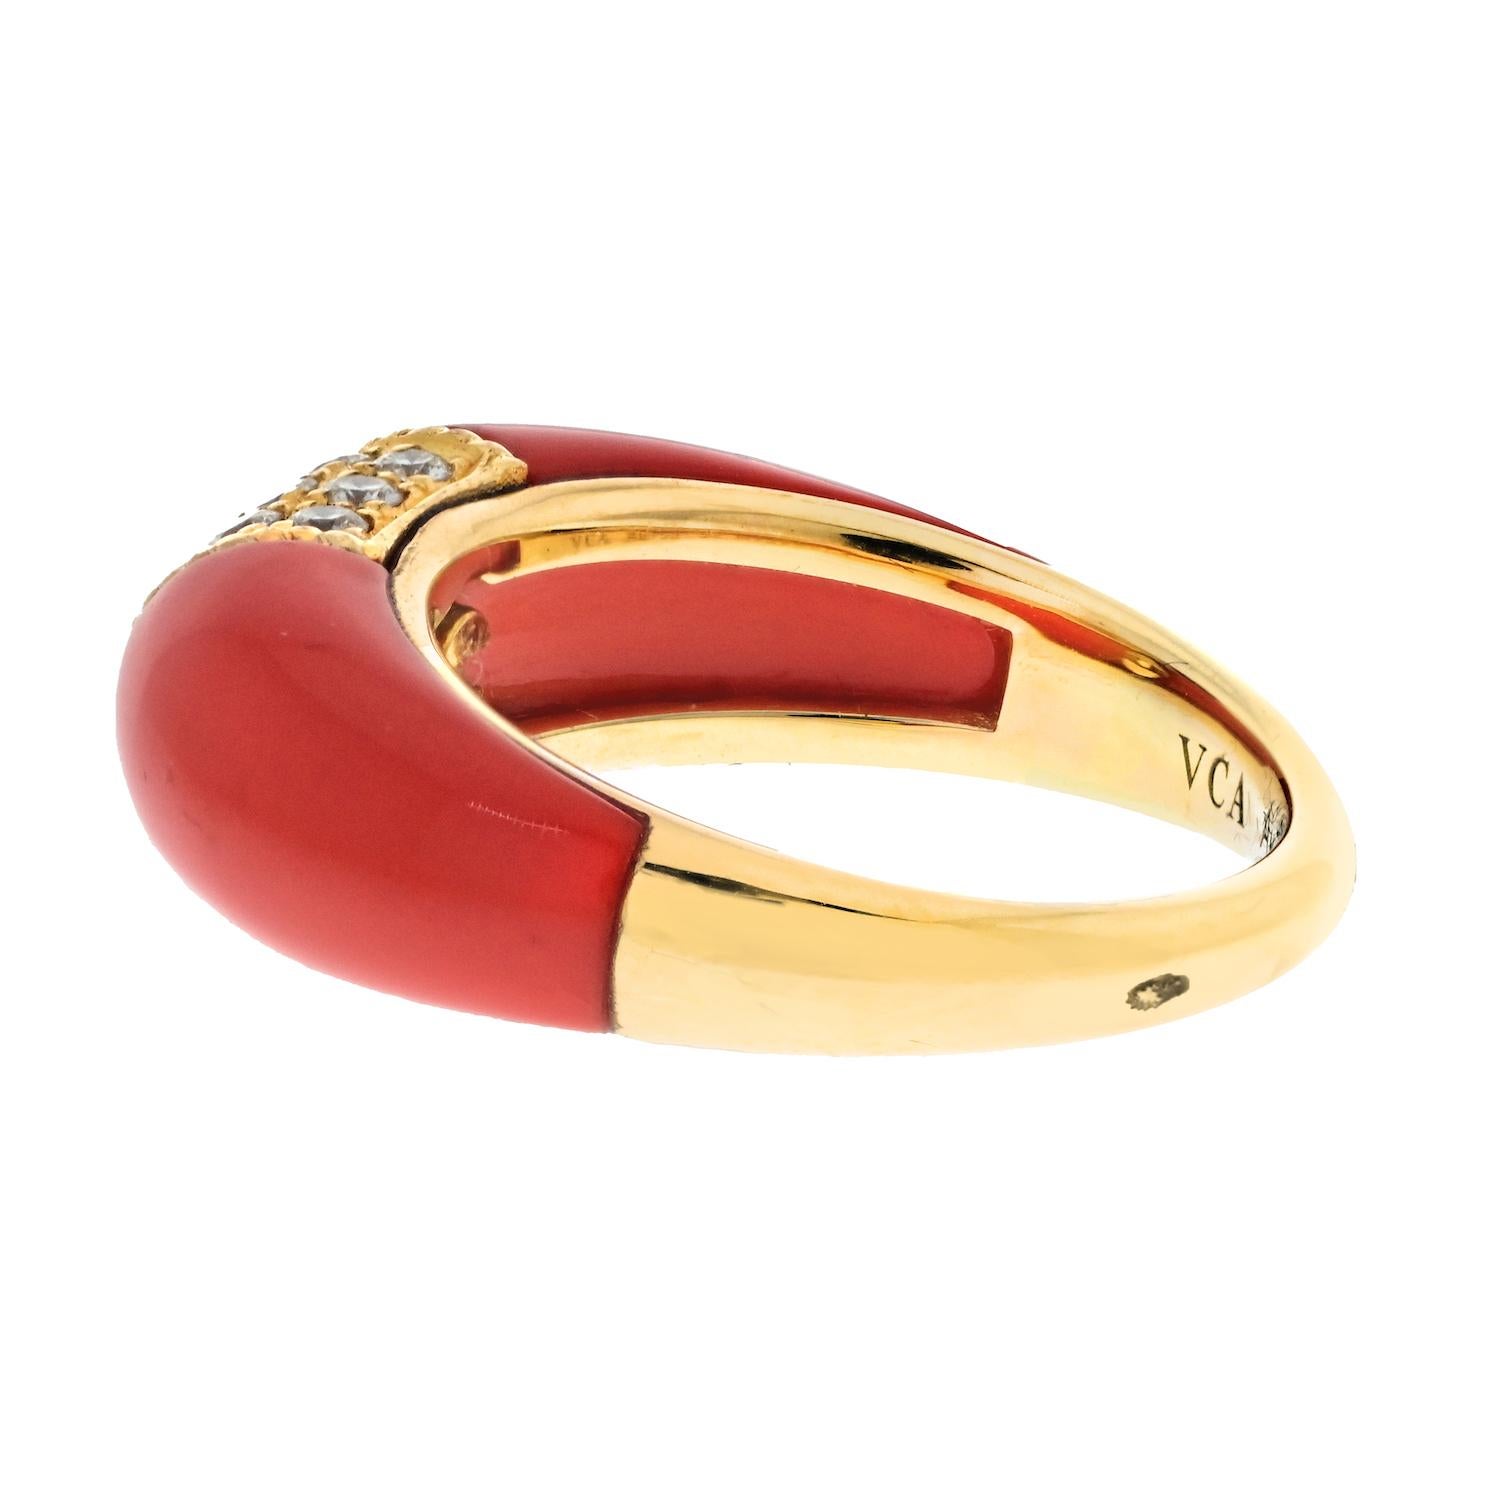 Modern Van Cleef & Arpels 18K Yellow Gold Philippine Diamond And Coral Ring Size 6